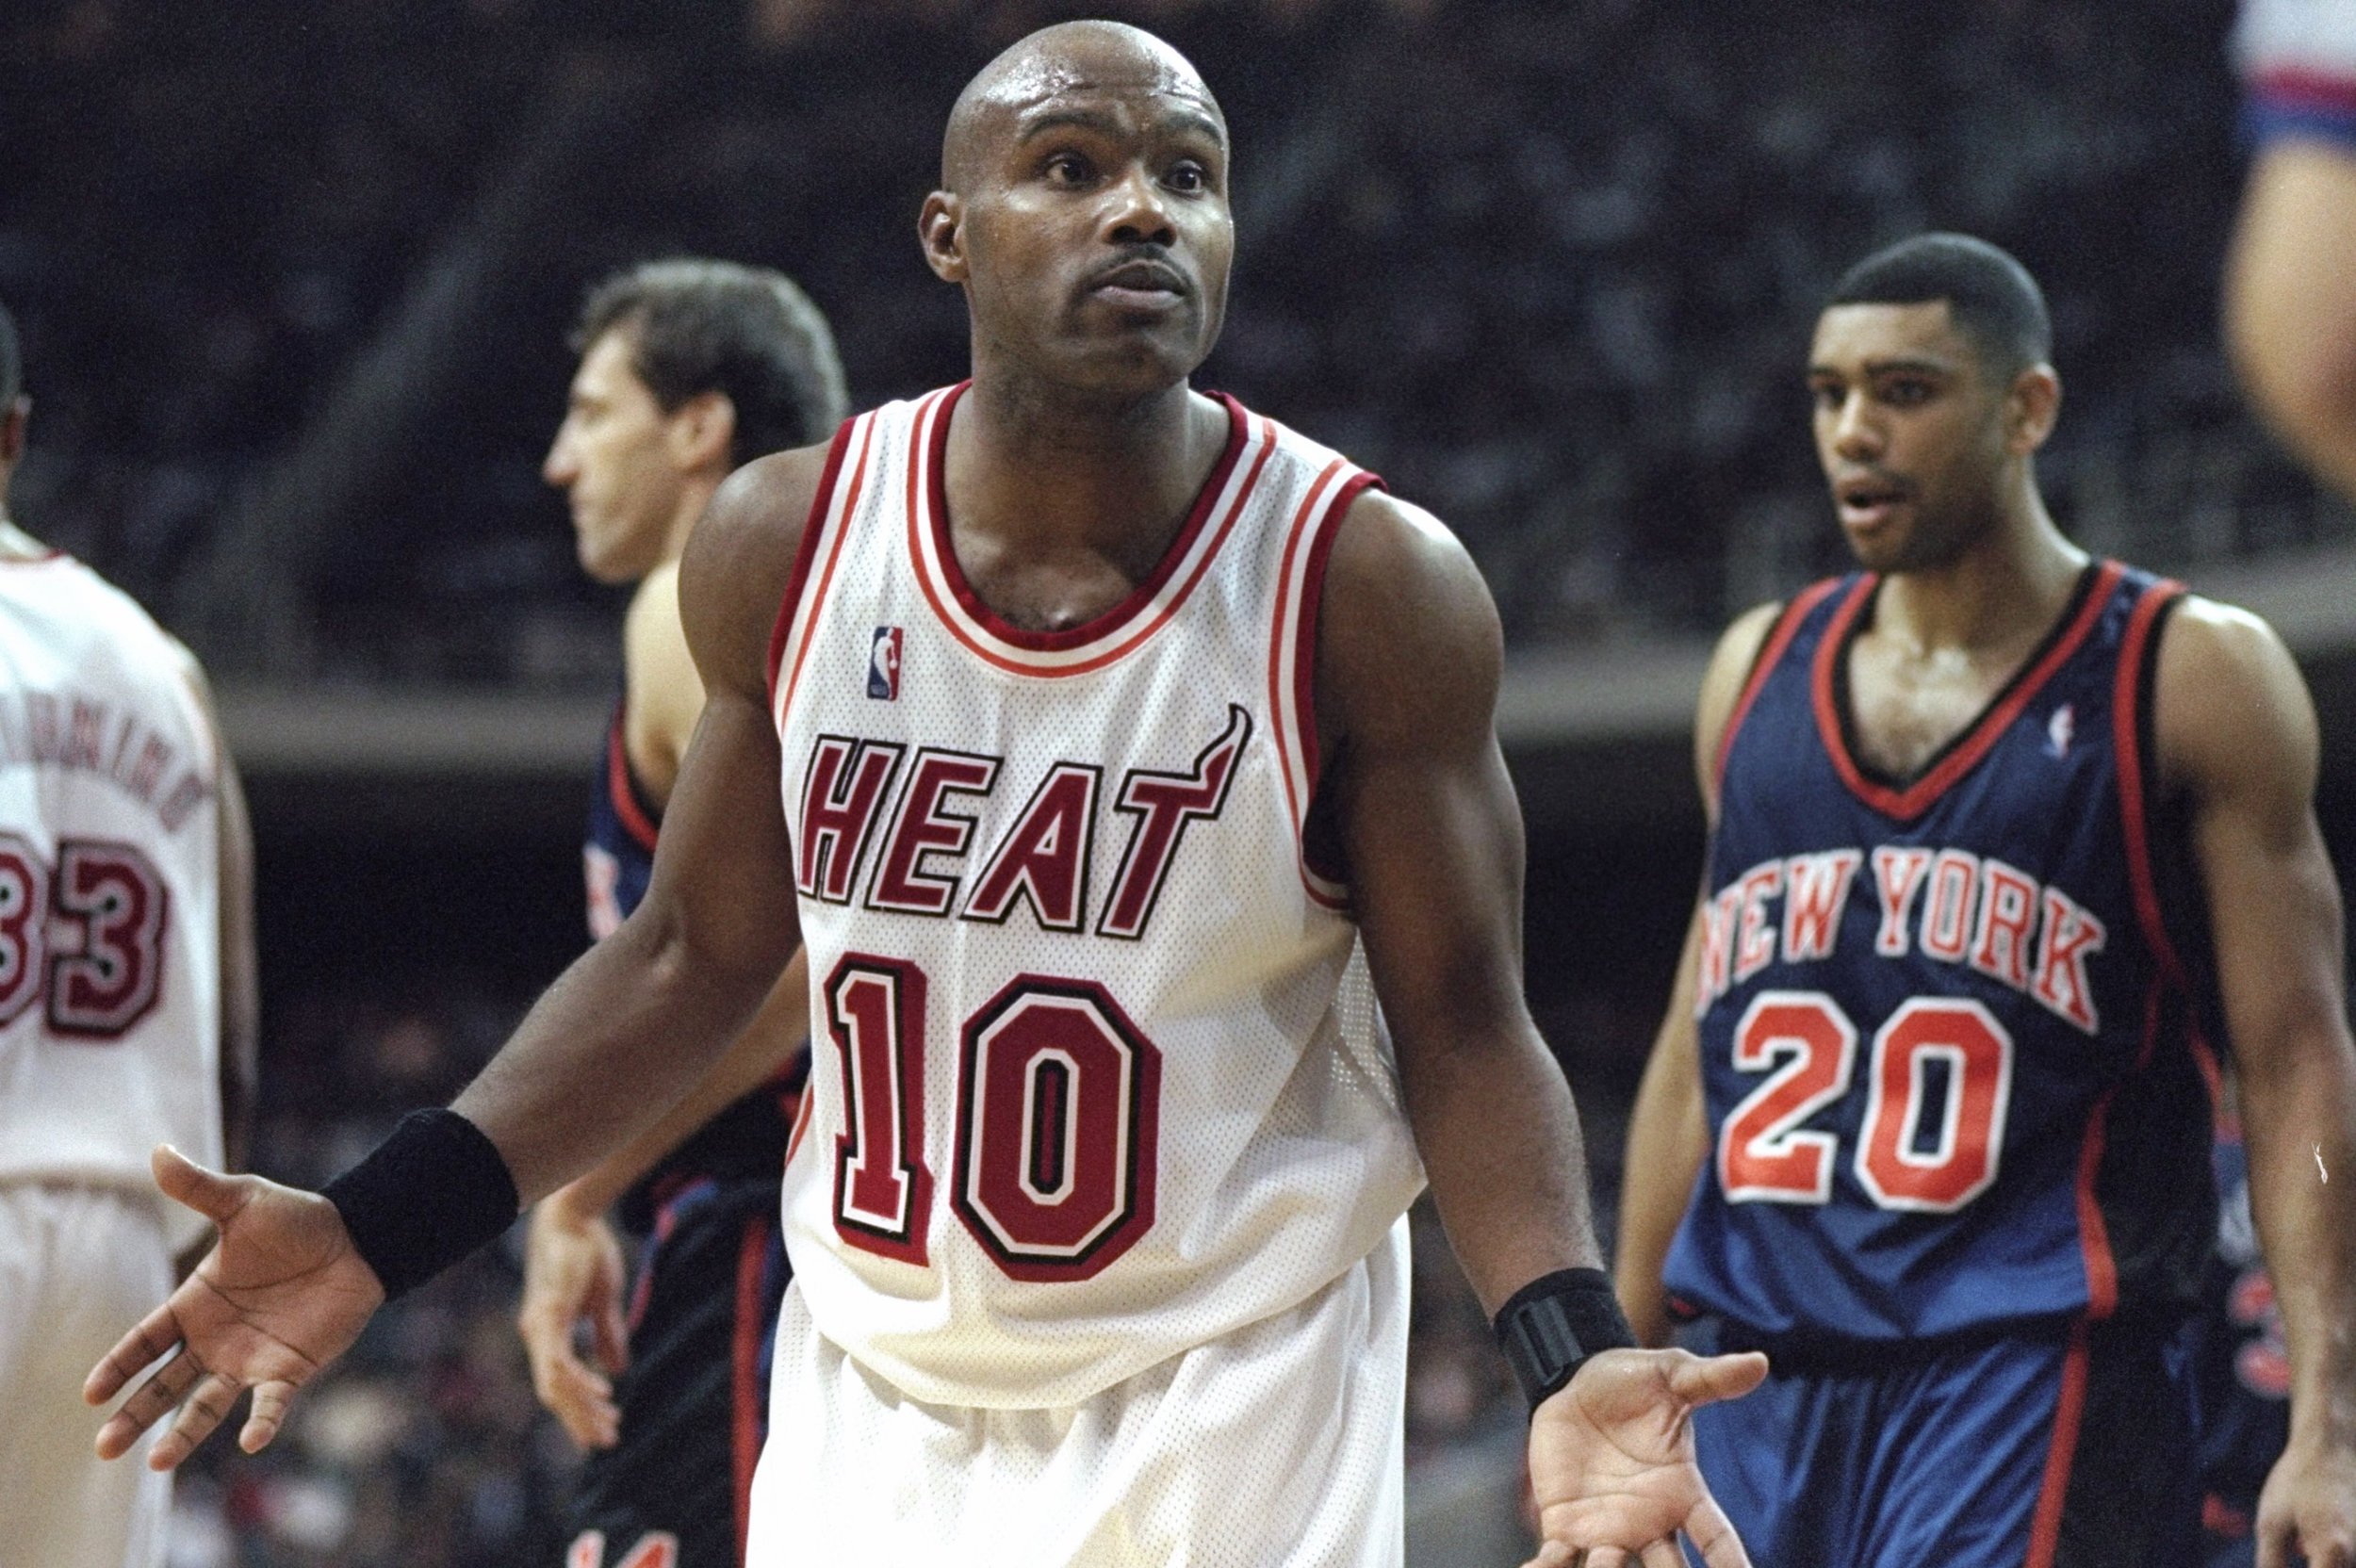 After telling the world he was homophobic, Tim Hardaway apologized and changed his behavior.